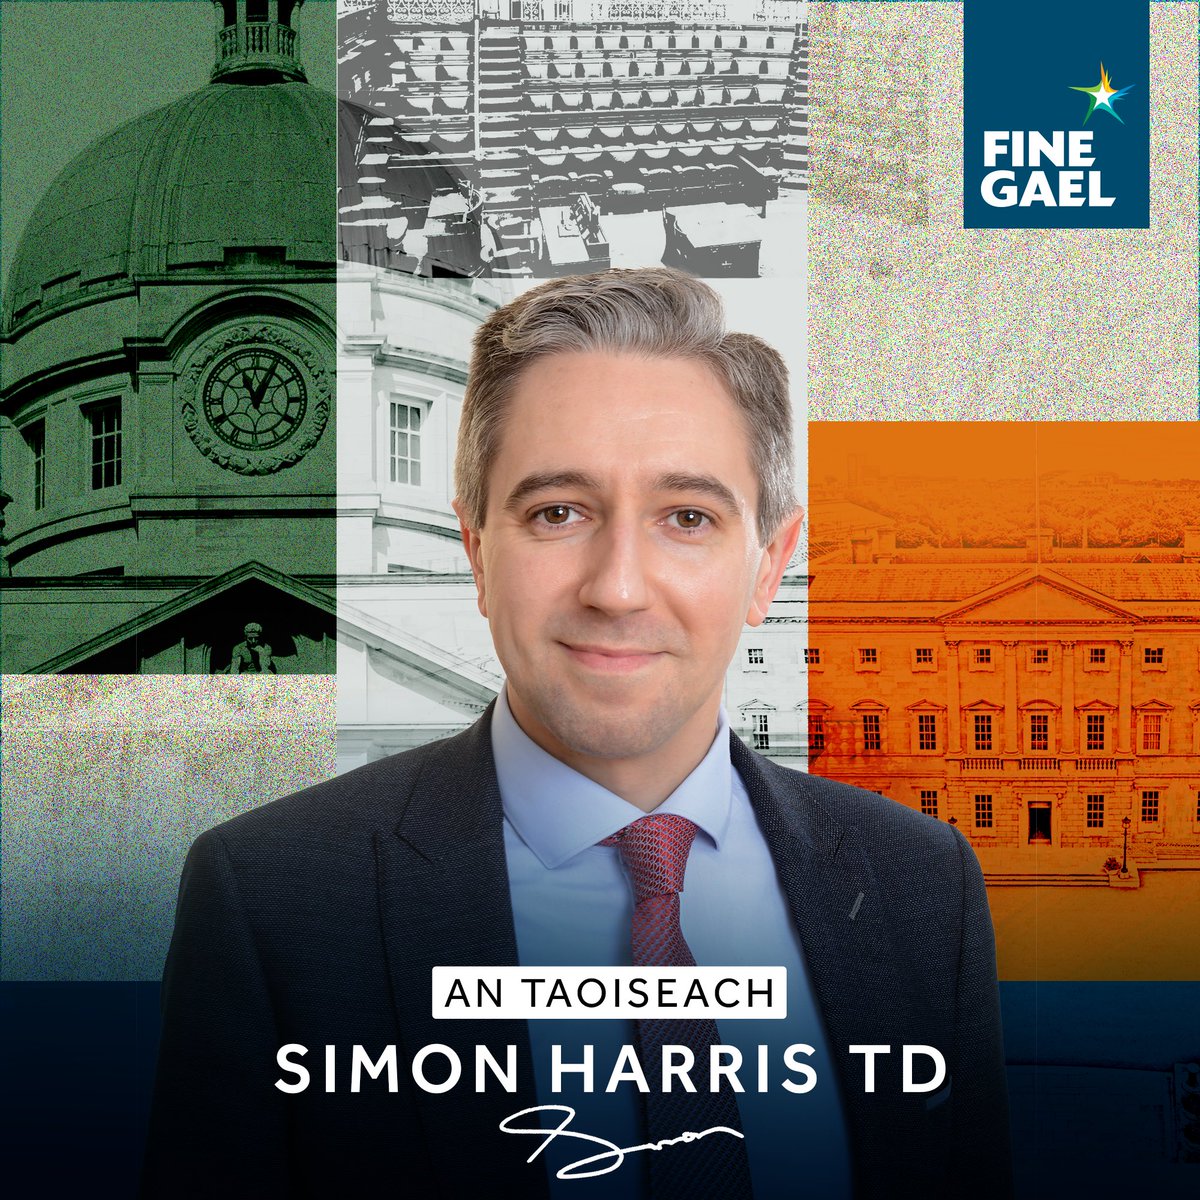 My sincerest congratulations to @SimonHarrisTD on his election as Taoiseach 🤝 I look forward to working closely with Simon on a number of key local and national issues